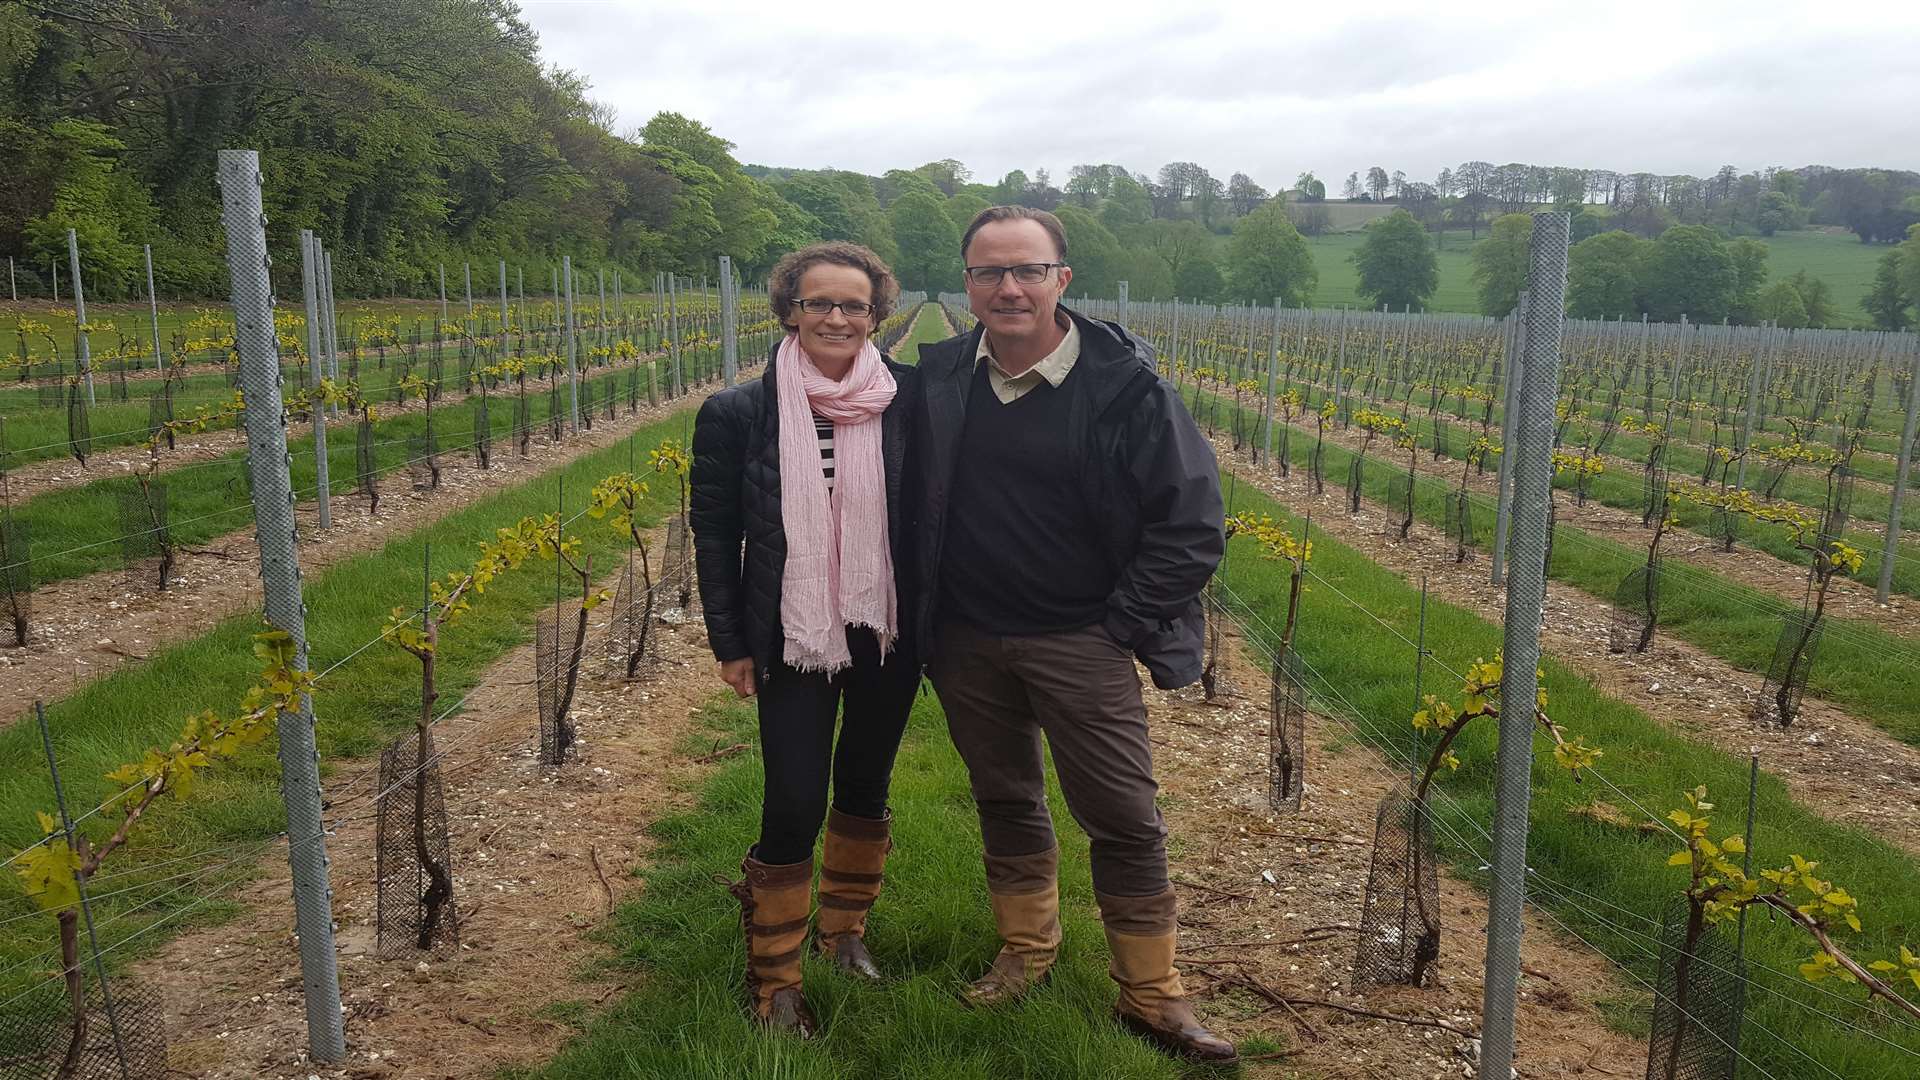 Ruth and Charles Simpson, owners of Simpsons Wine Estate